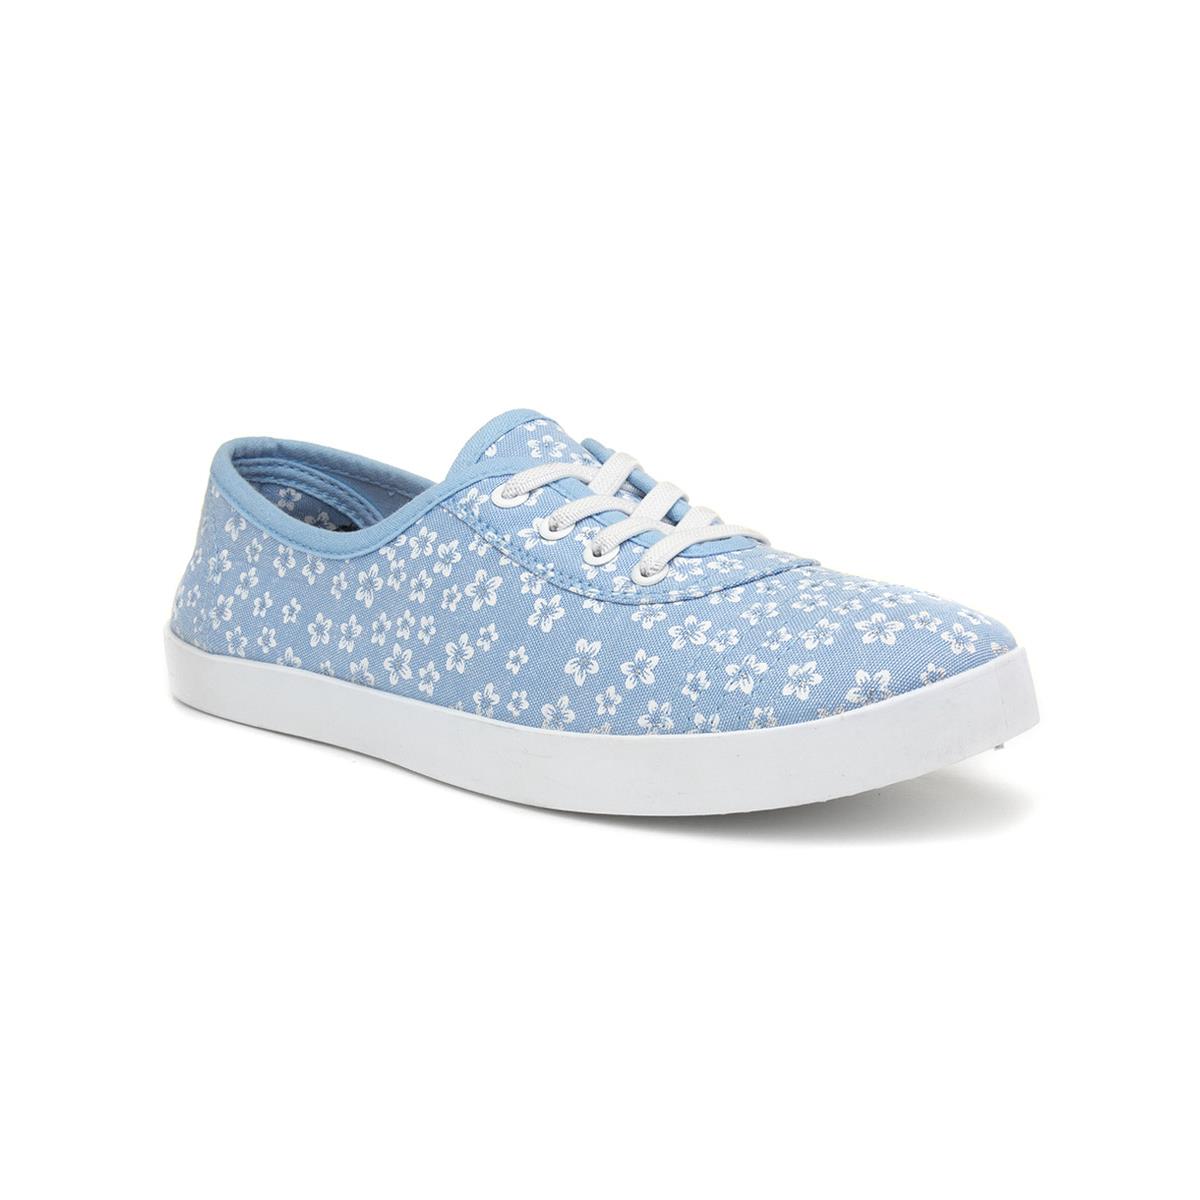 Lilley Womens Blue Floral Lace Up Canvas-16542 | Shoe Zone